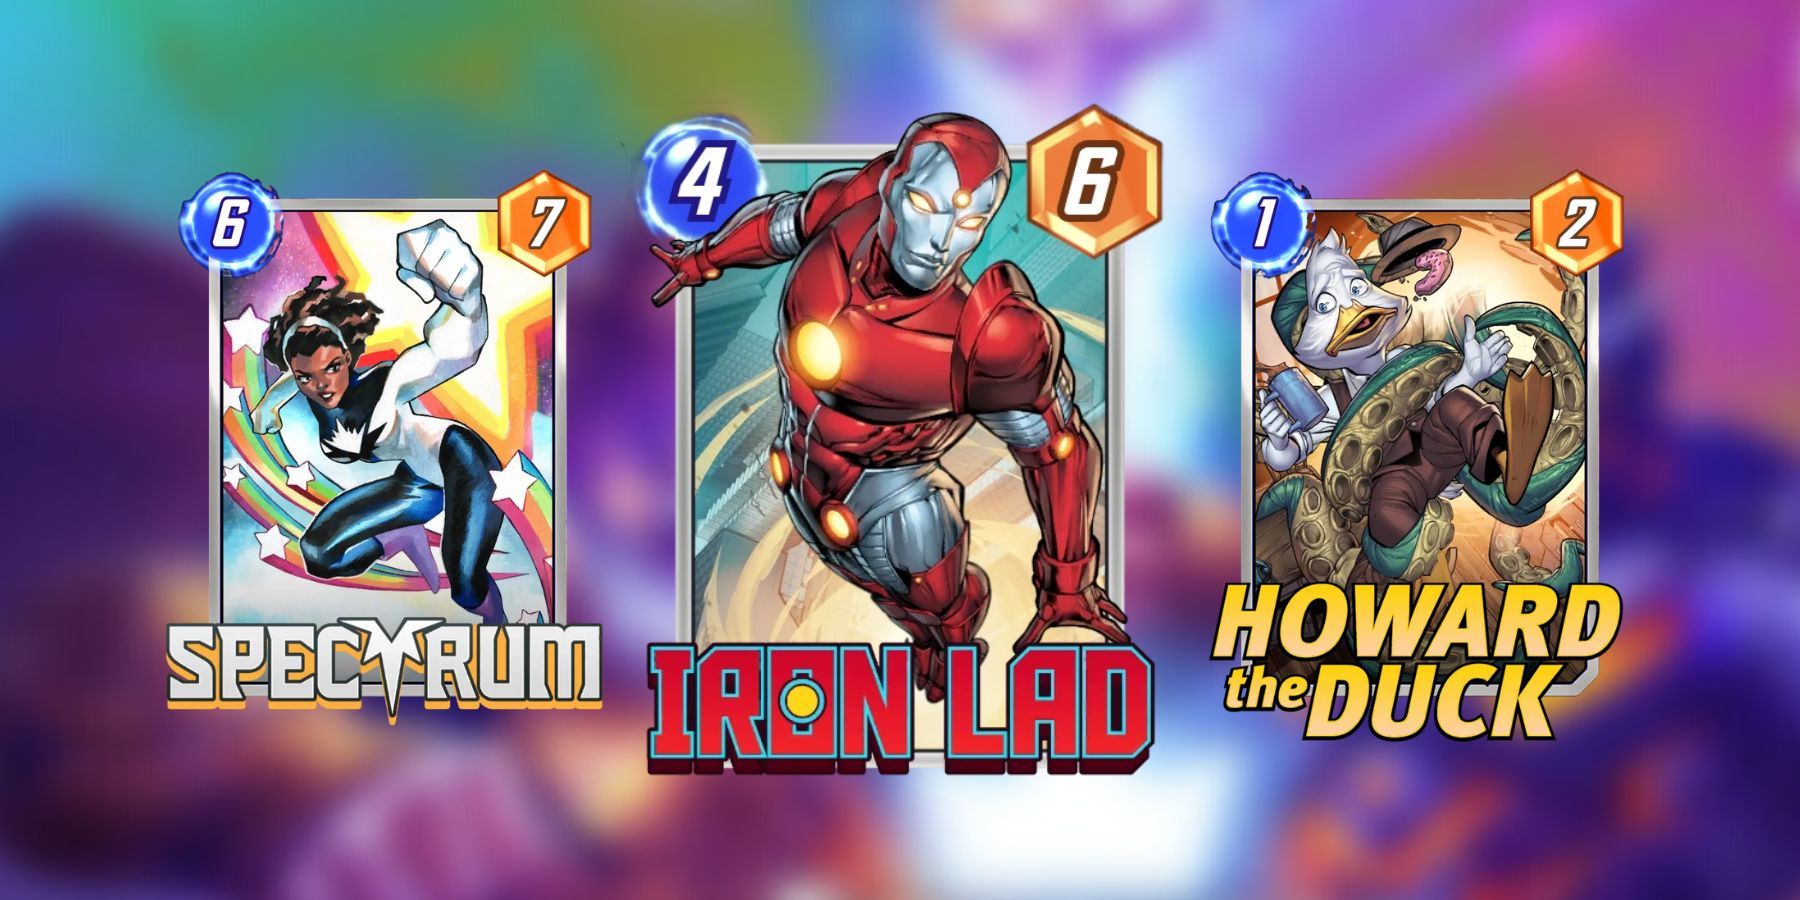 iron lad, spectrum, howard the deck in marvel snap.